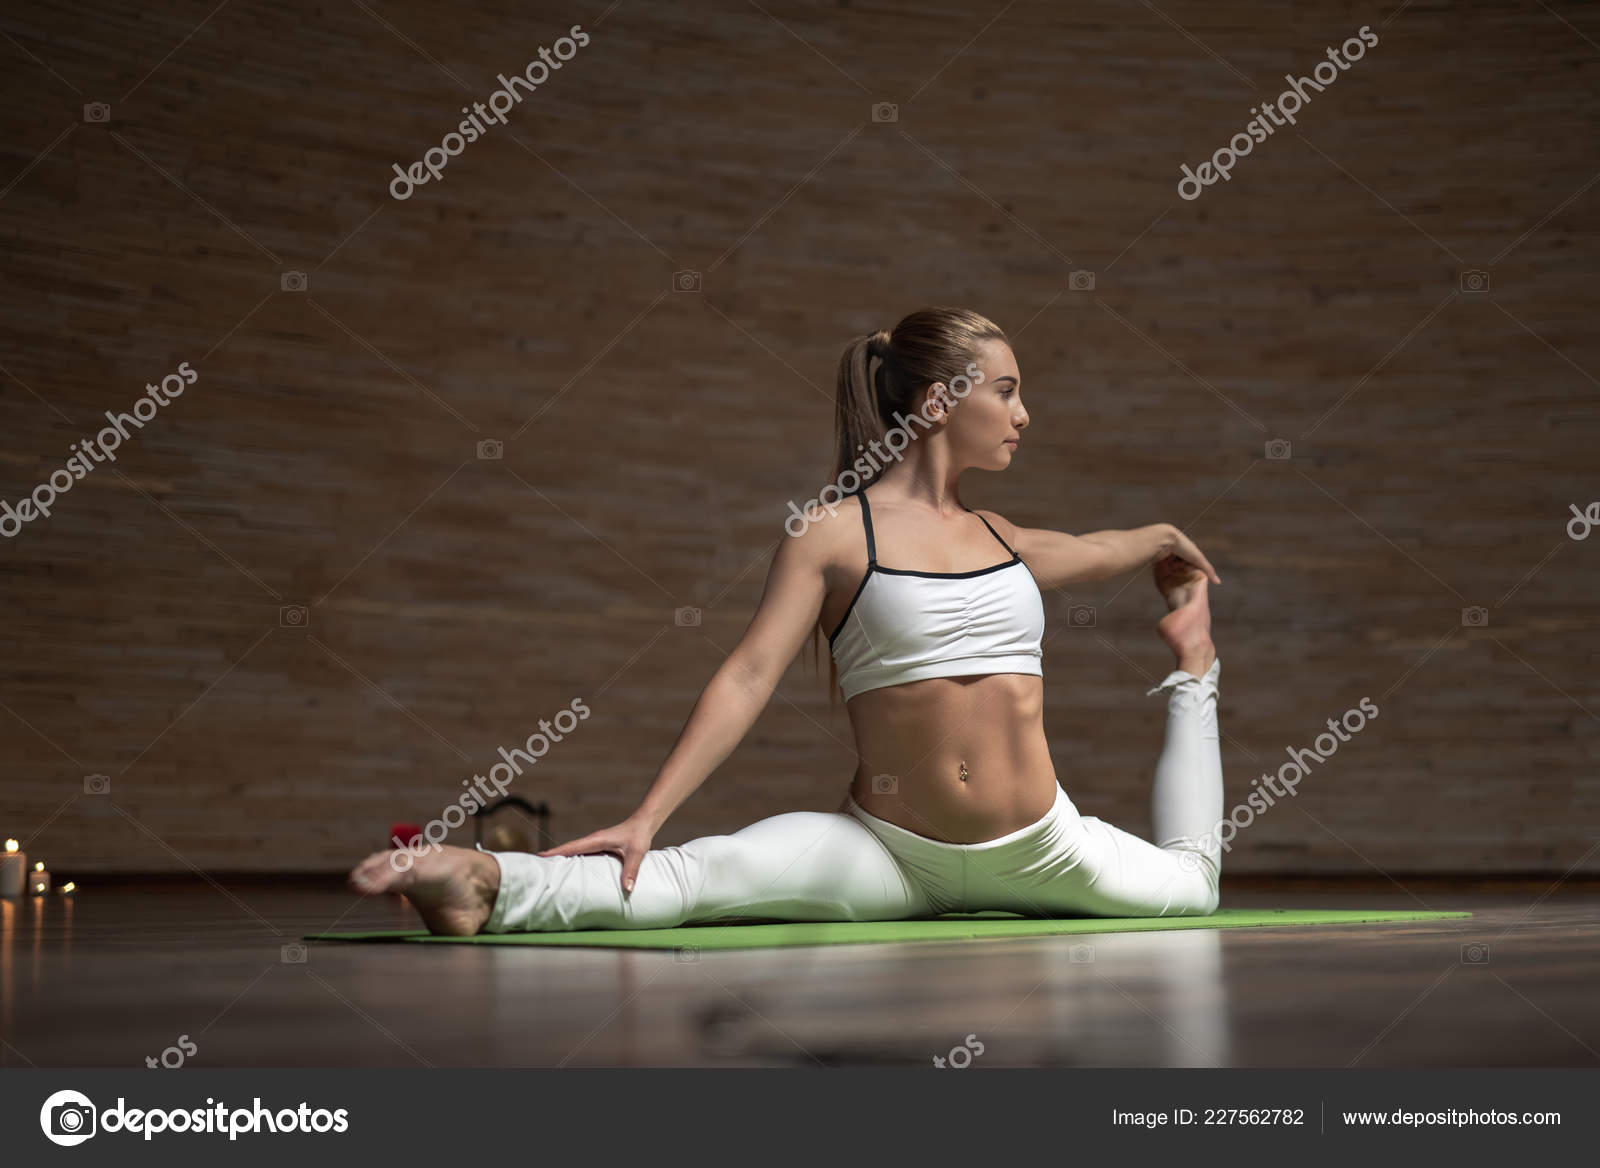 Slim lady touching her toes while stretching her legs on yoga mat